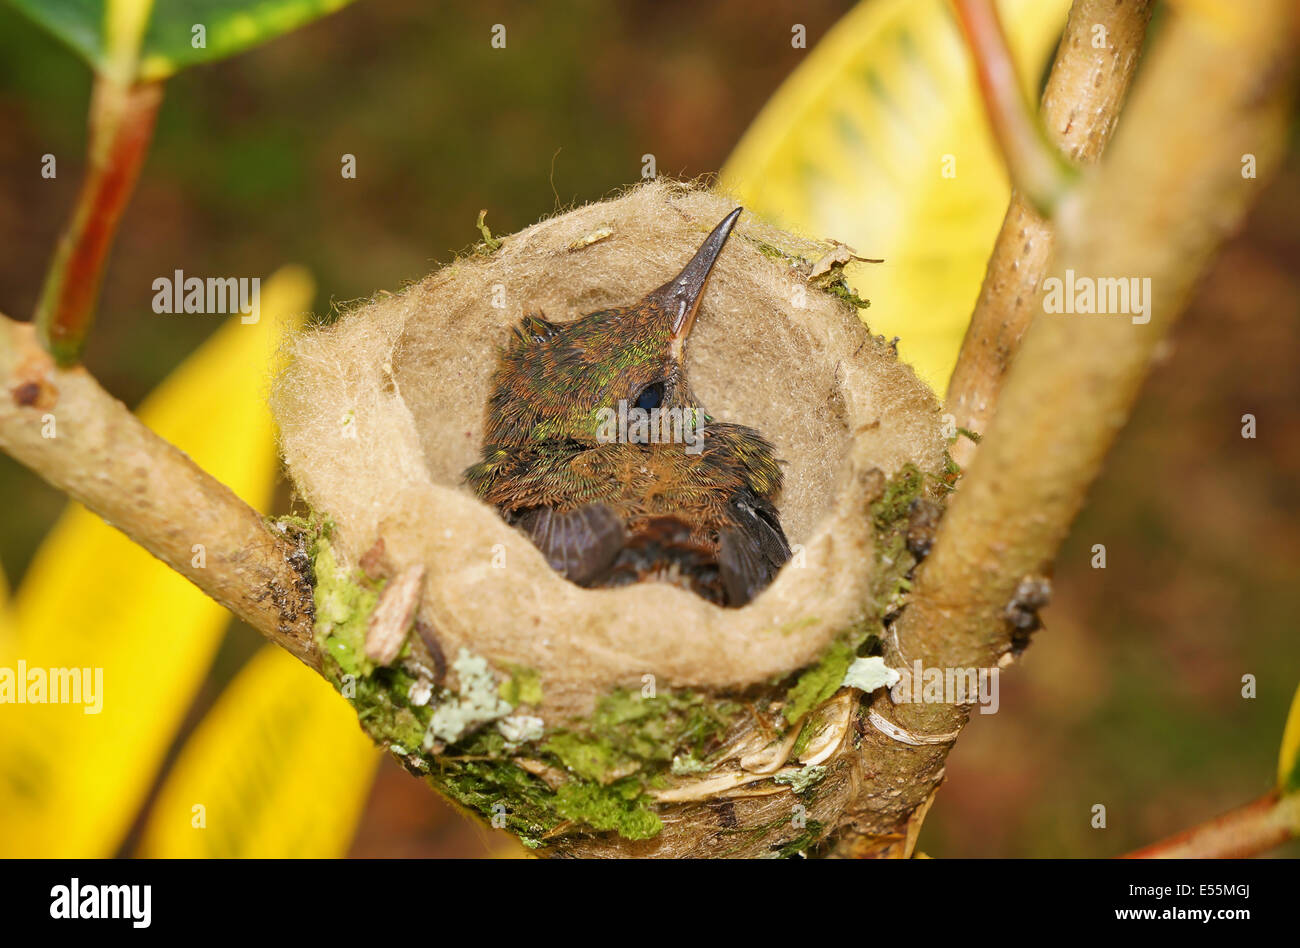 baby bird of Rufous-tailed hummingbird in the nest, 18 days old, Costa Rica, Central America Stock Photo